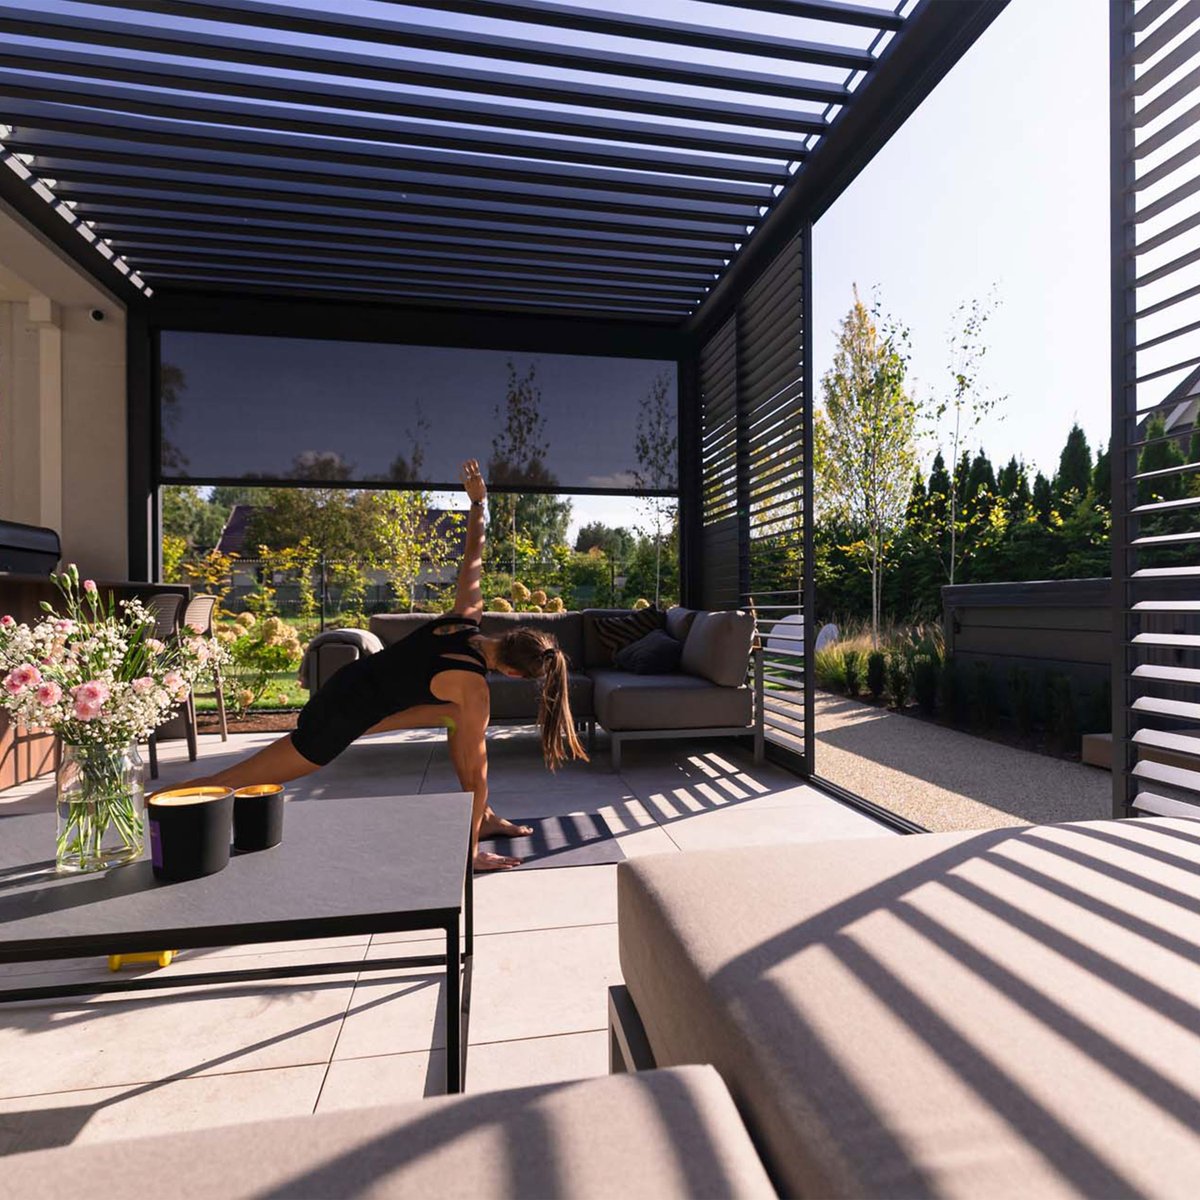 Create your ultimate outdoor sanctuary this summer with our luxurious Garden Pergolas made to your specification ☀️🌳 Head to the link below to request your own personal quote ⬇️ instashade.co.uk/contact/